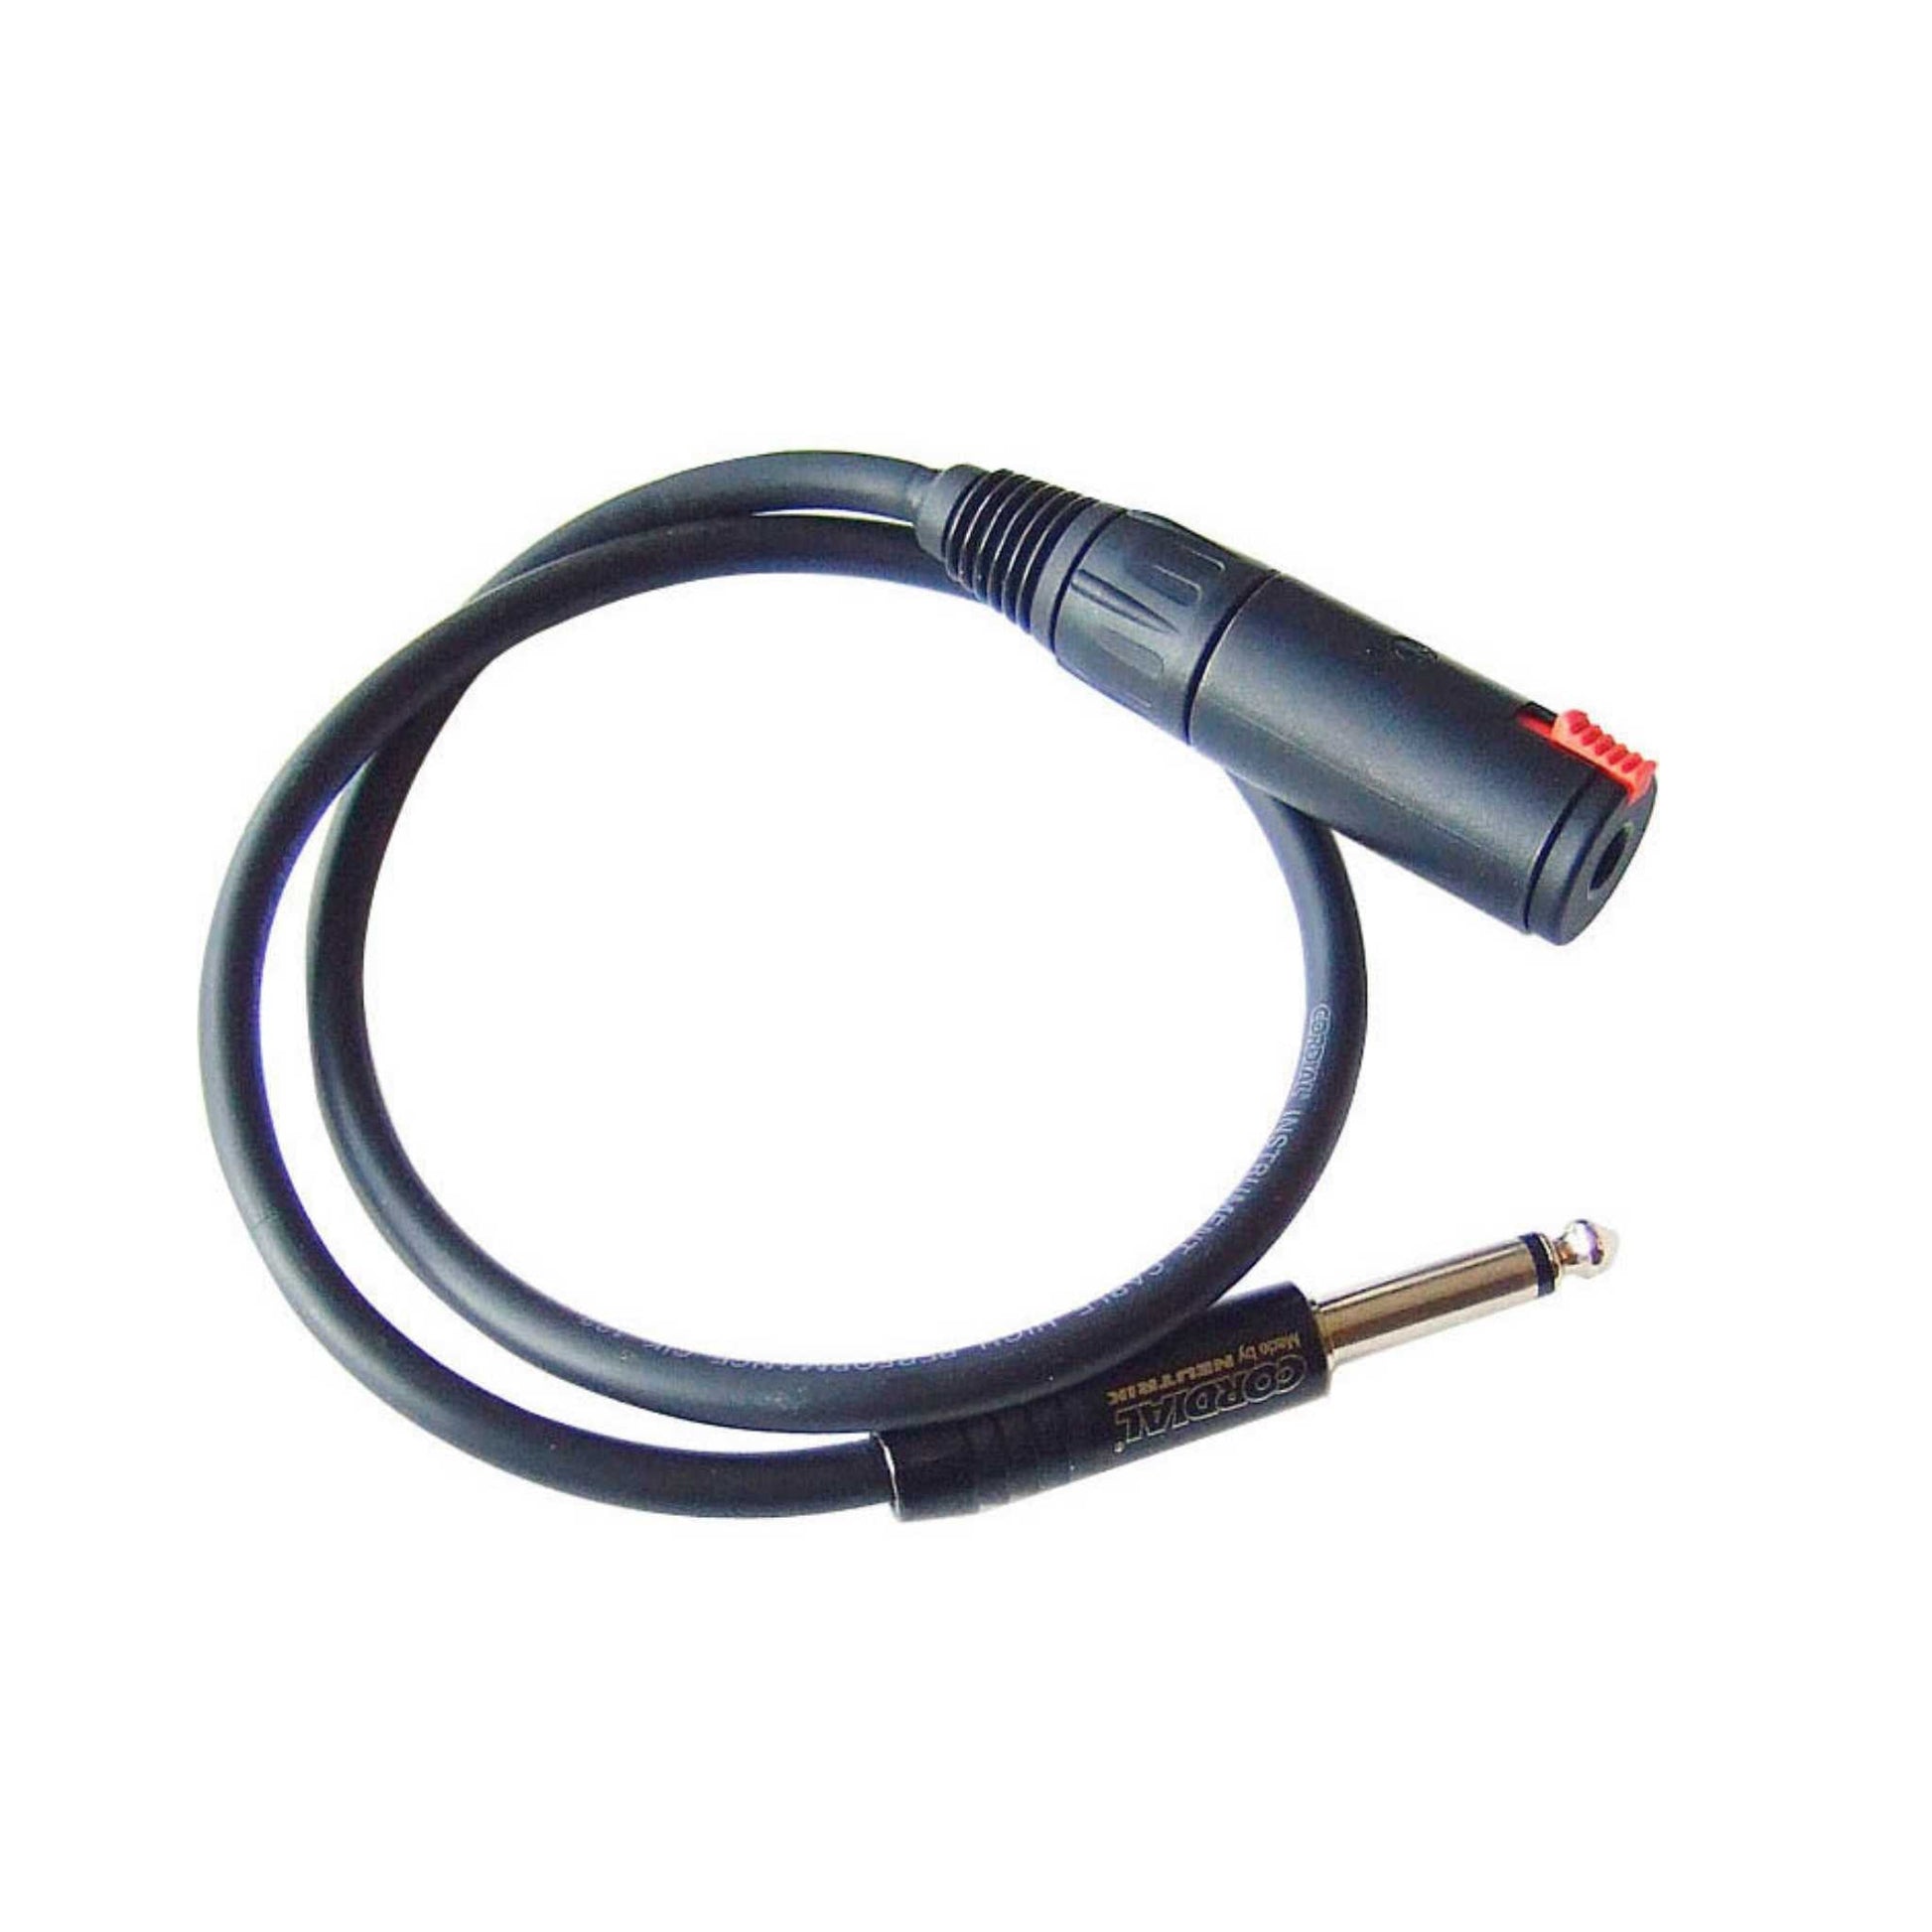 StageClix black extension cable for guitar Jack Transmitter